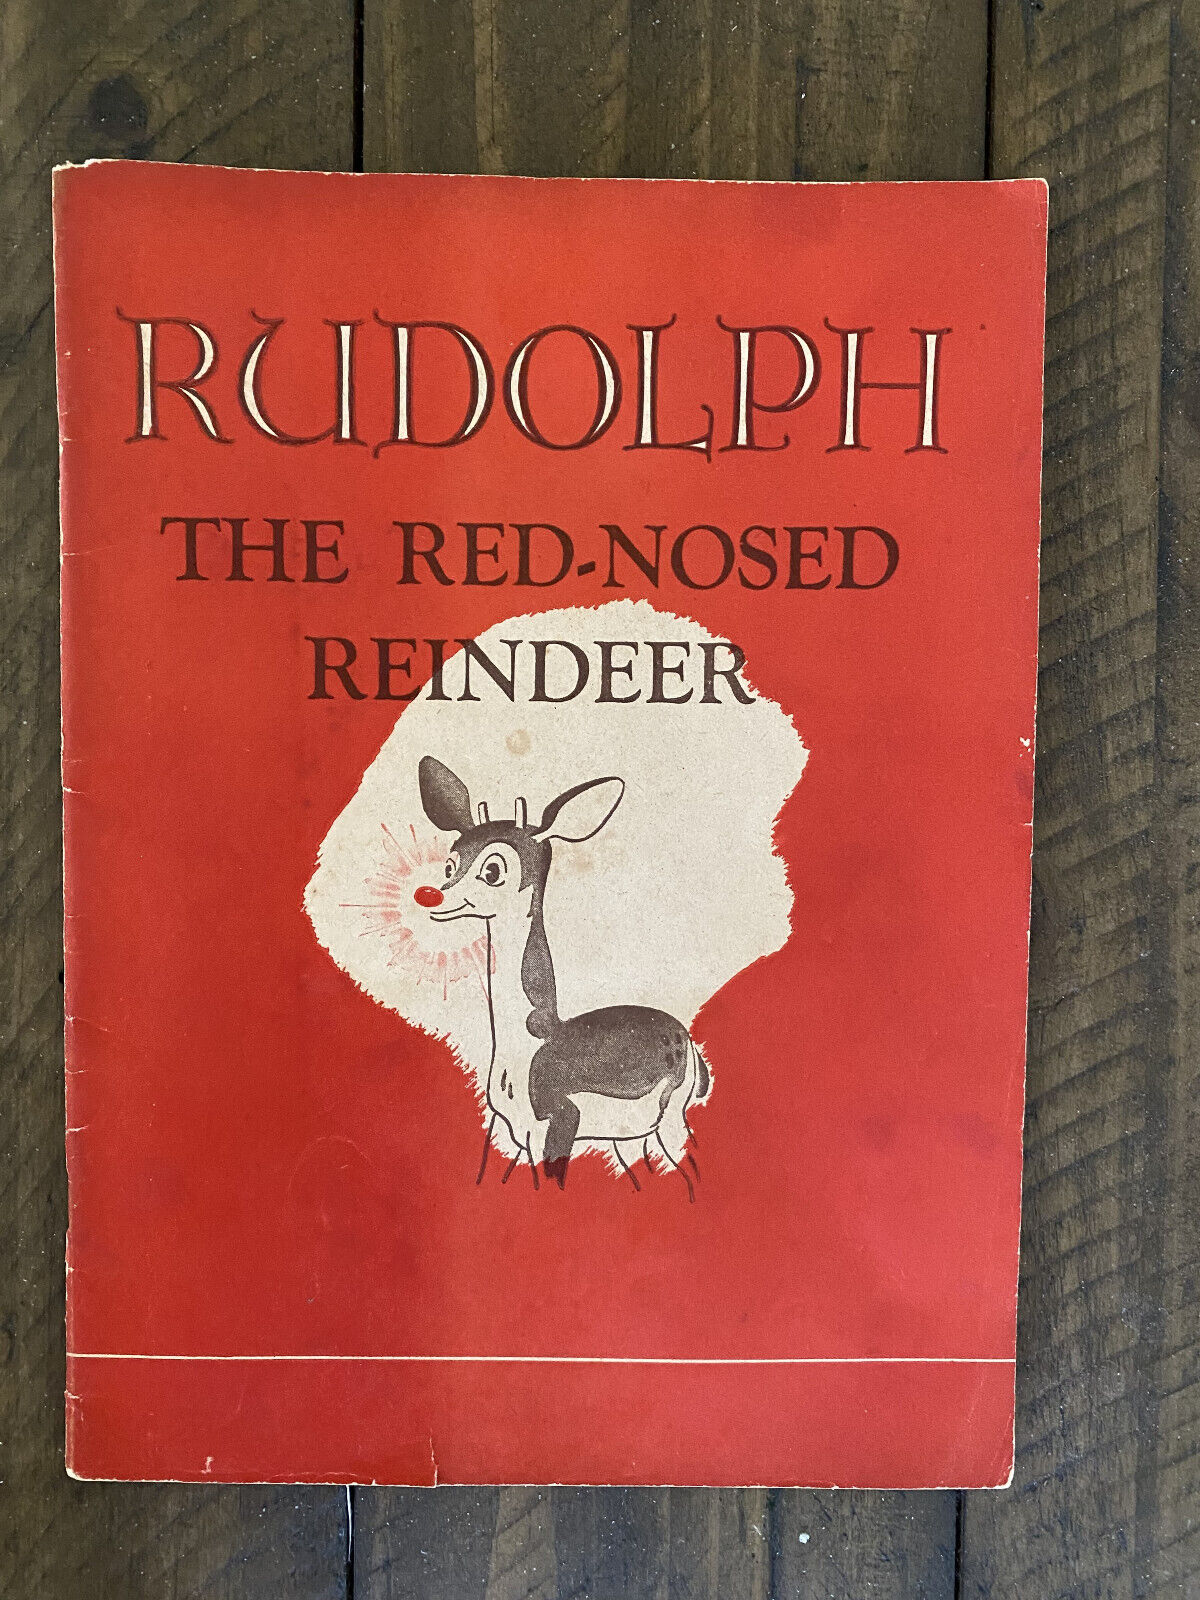 Montgomery Ward 1939 Giveaway Book RLM Rudolph Reindeer Really Very Good